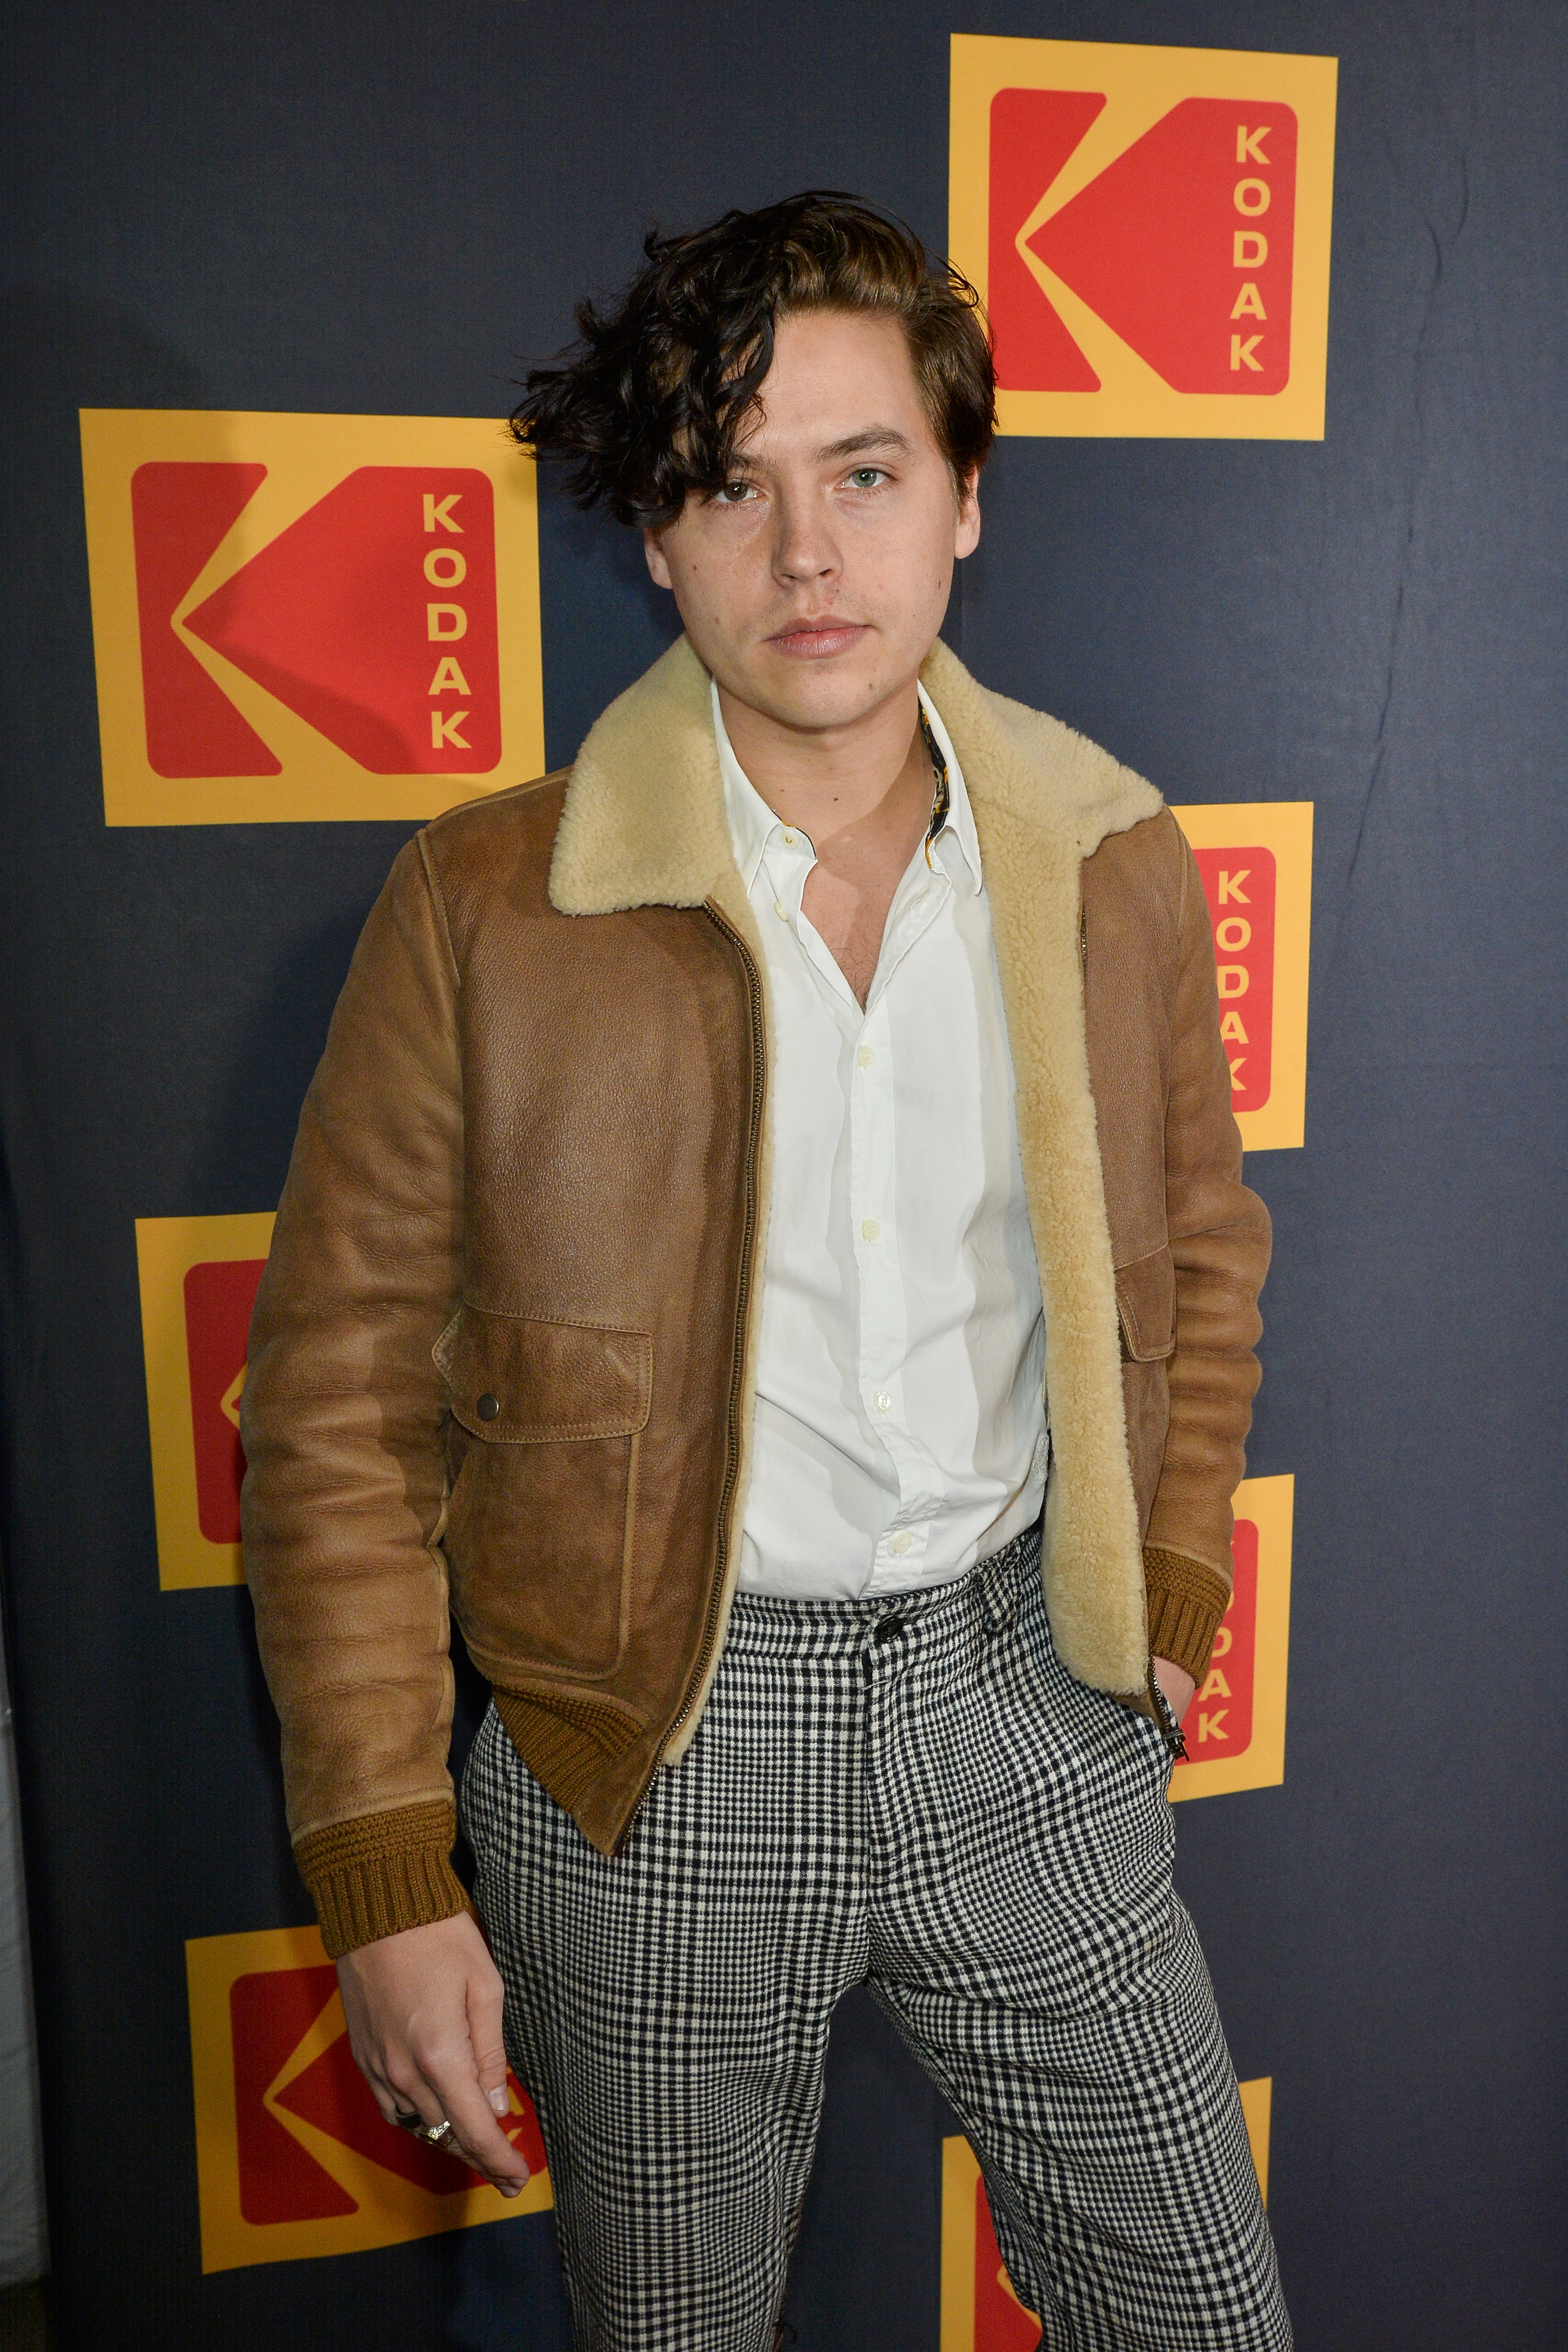 Closeup of Cole Sprouse at a media event wearing a shearling coat and slacks